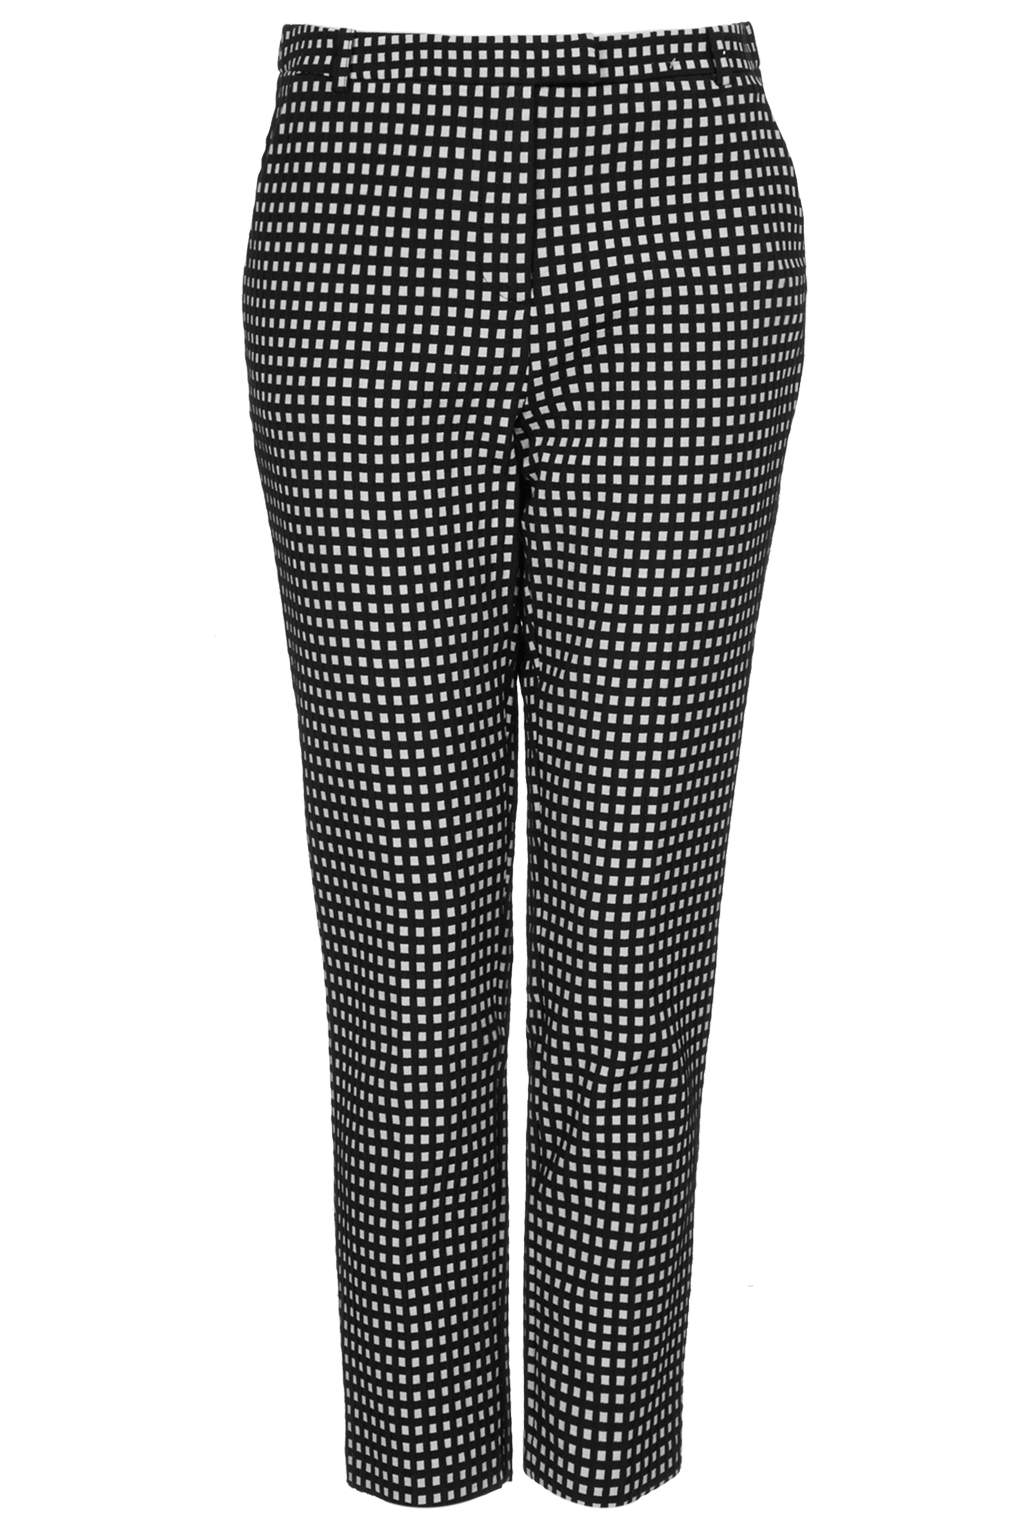 Lyst - Topshop Gingham Cigarette Trousers in Black